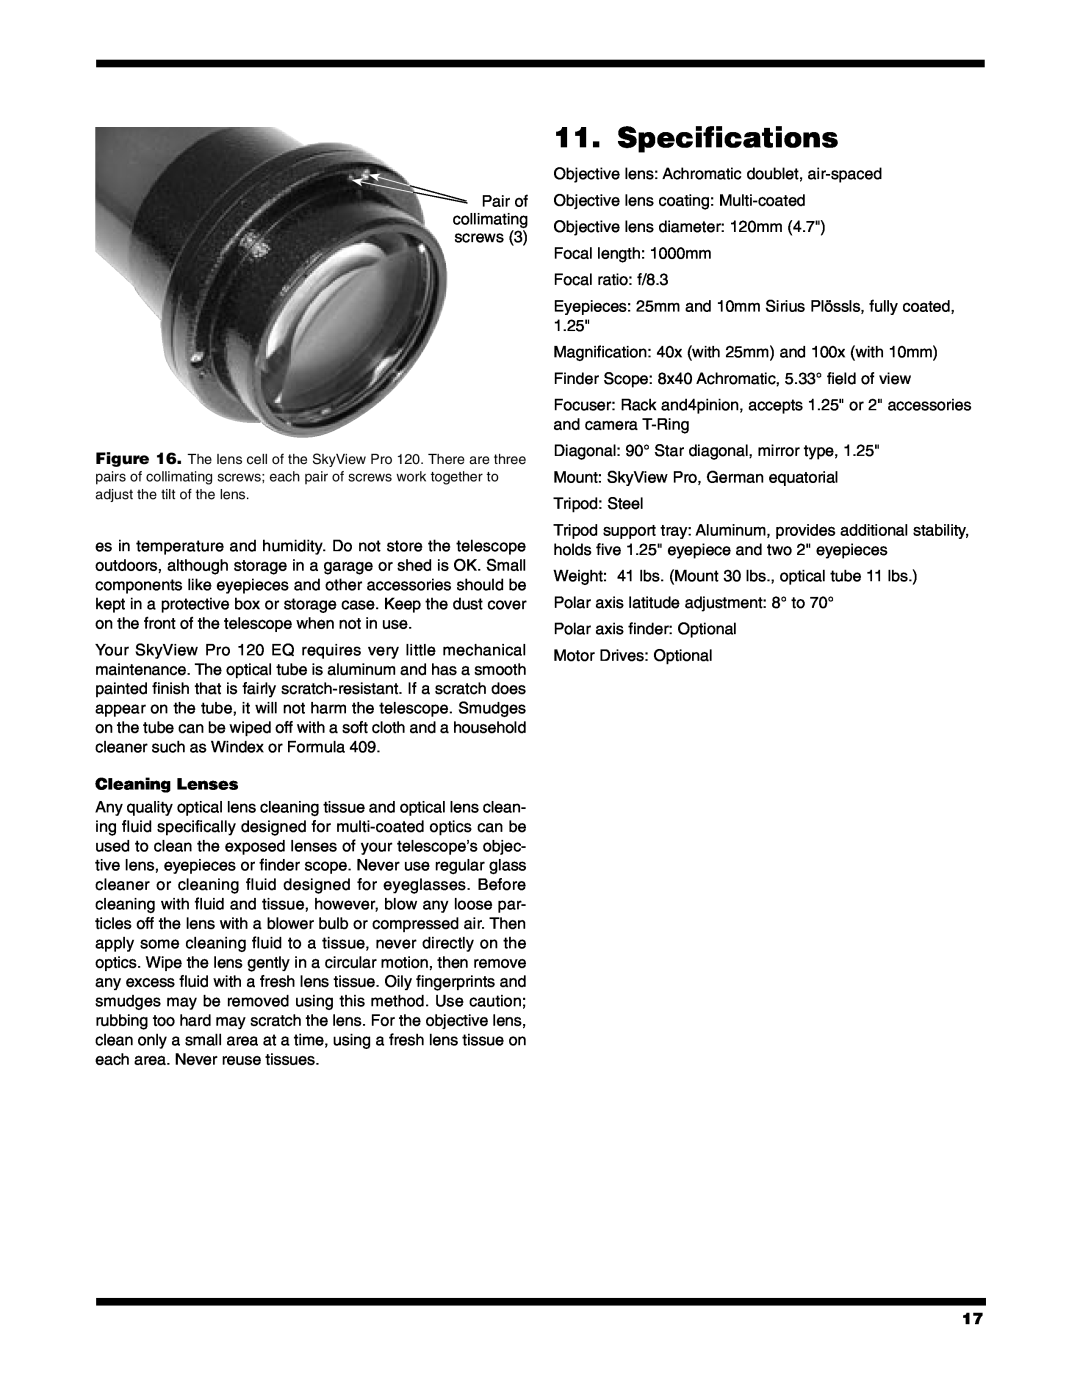 Orion PRO 120 EQ instruction manual Specifications, Cleaning Lenses 